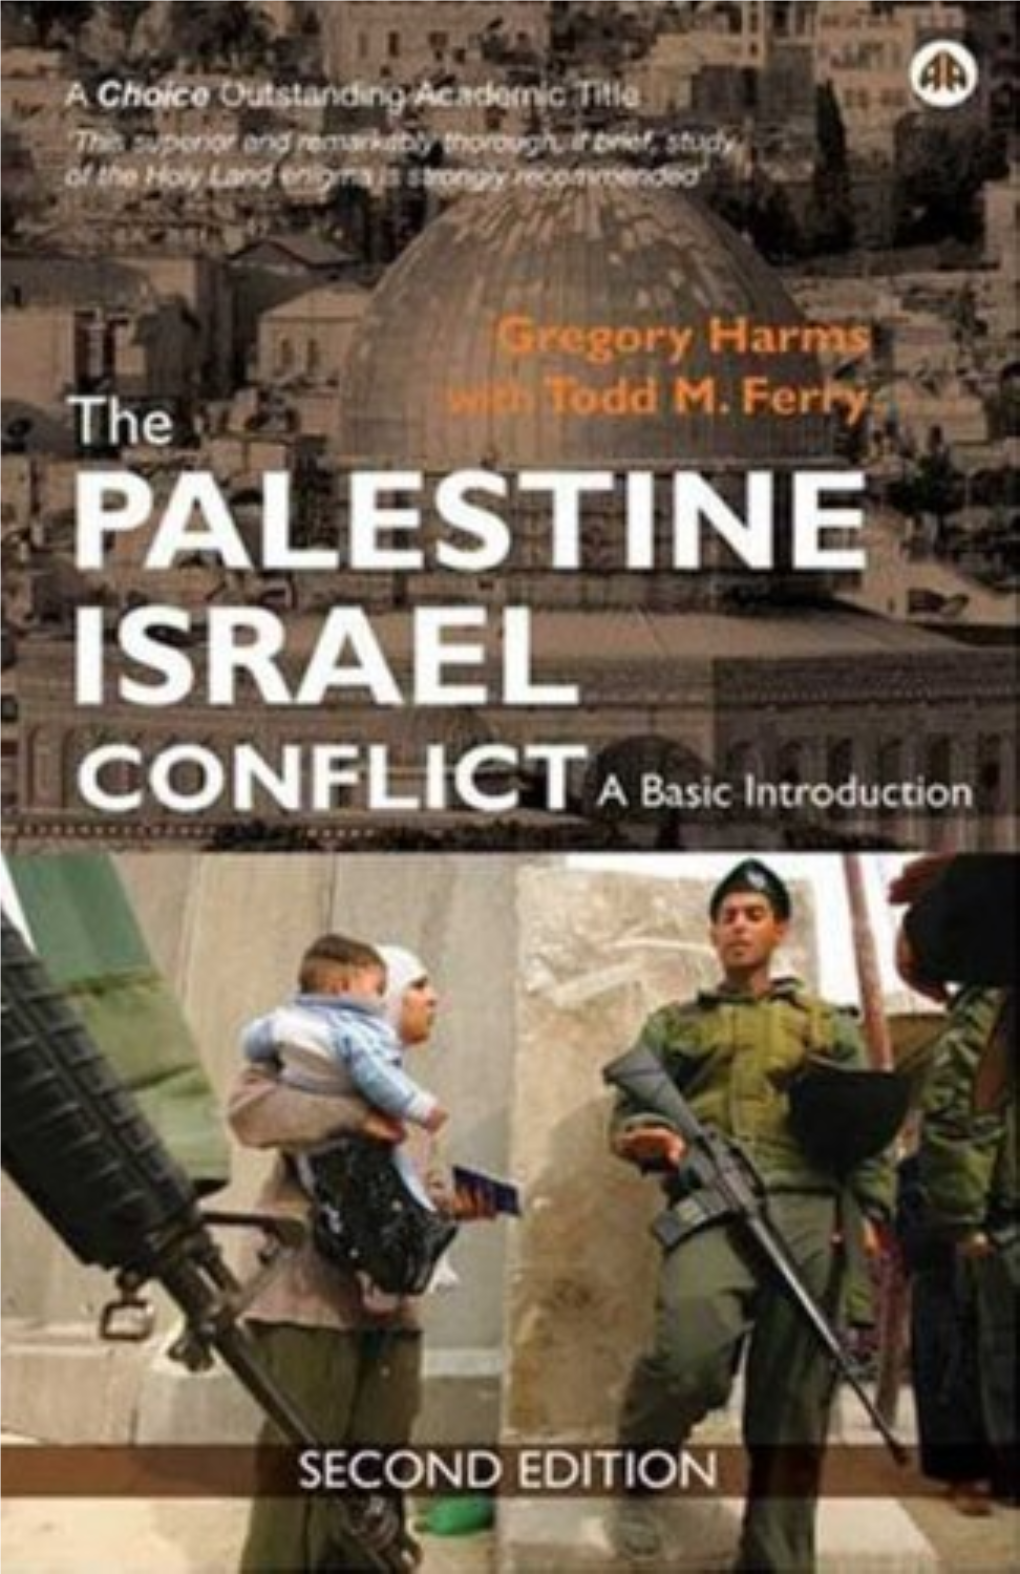 The Palestine–Israel Conflict Particularly, It Is Important That We Get Our Bearings and Go in with an Understanding of Where It Is We’Re Talking About